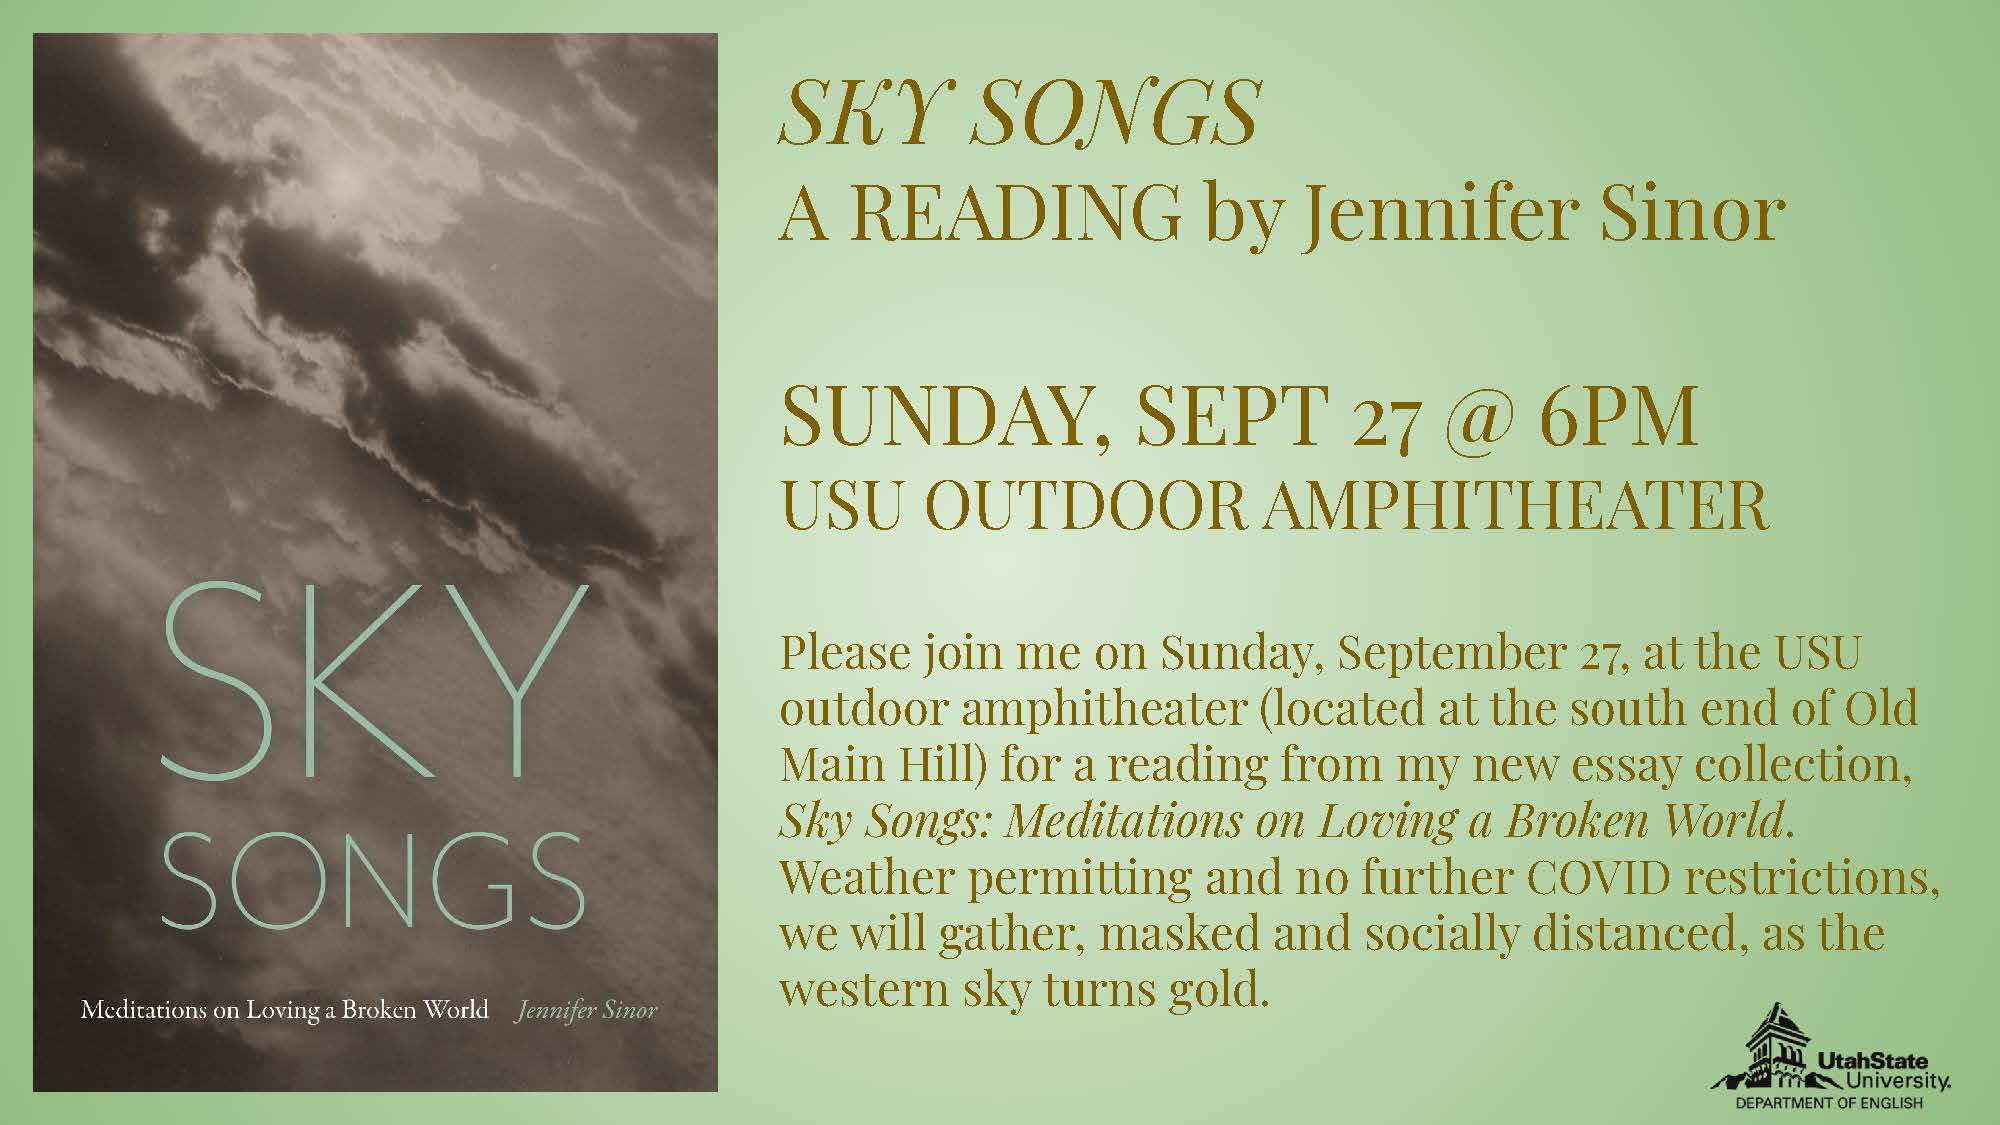 Sky Songs reading announcement